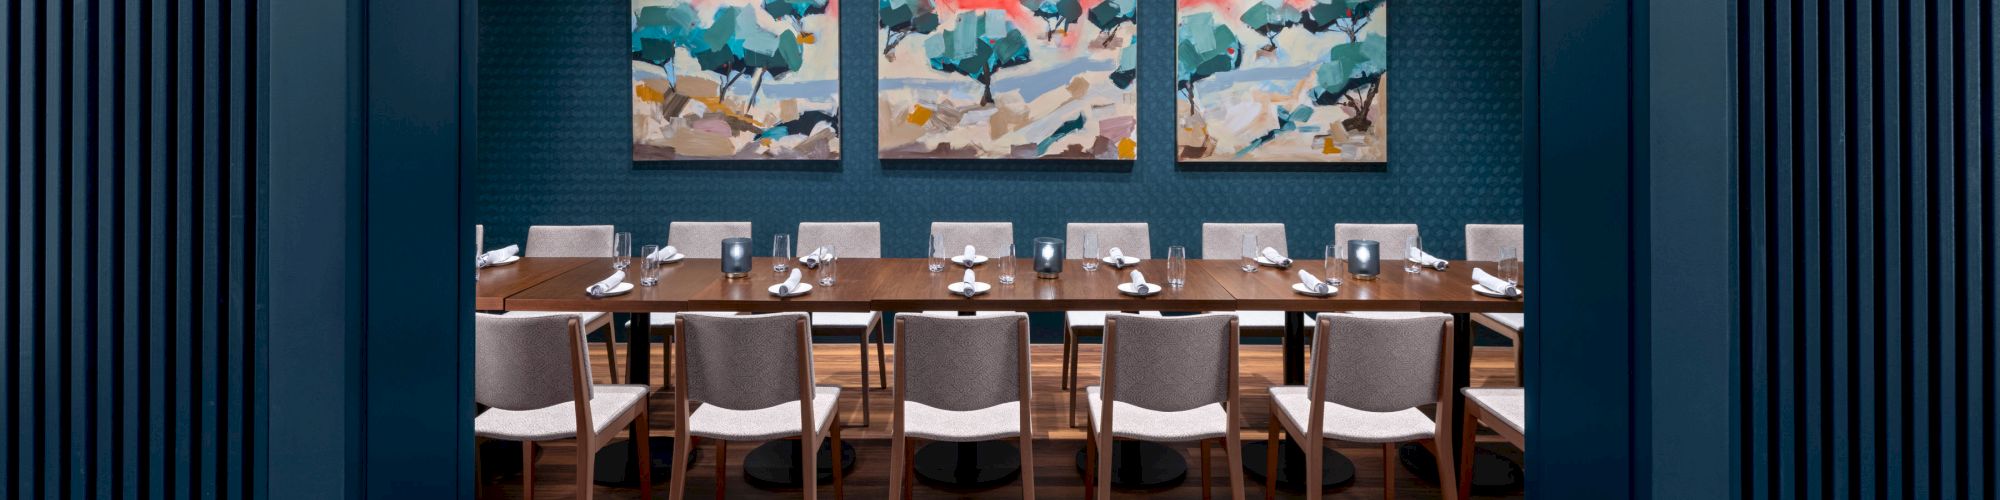 A modern dining room features a long table with chairs, stylish artwork on the walls, and a central hanging light fixture.